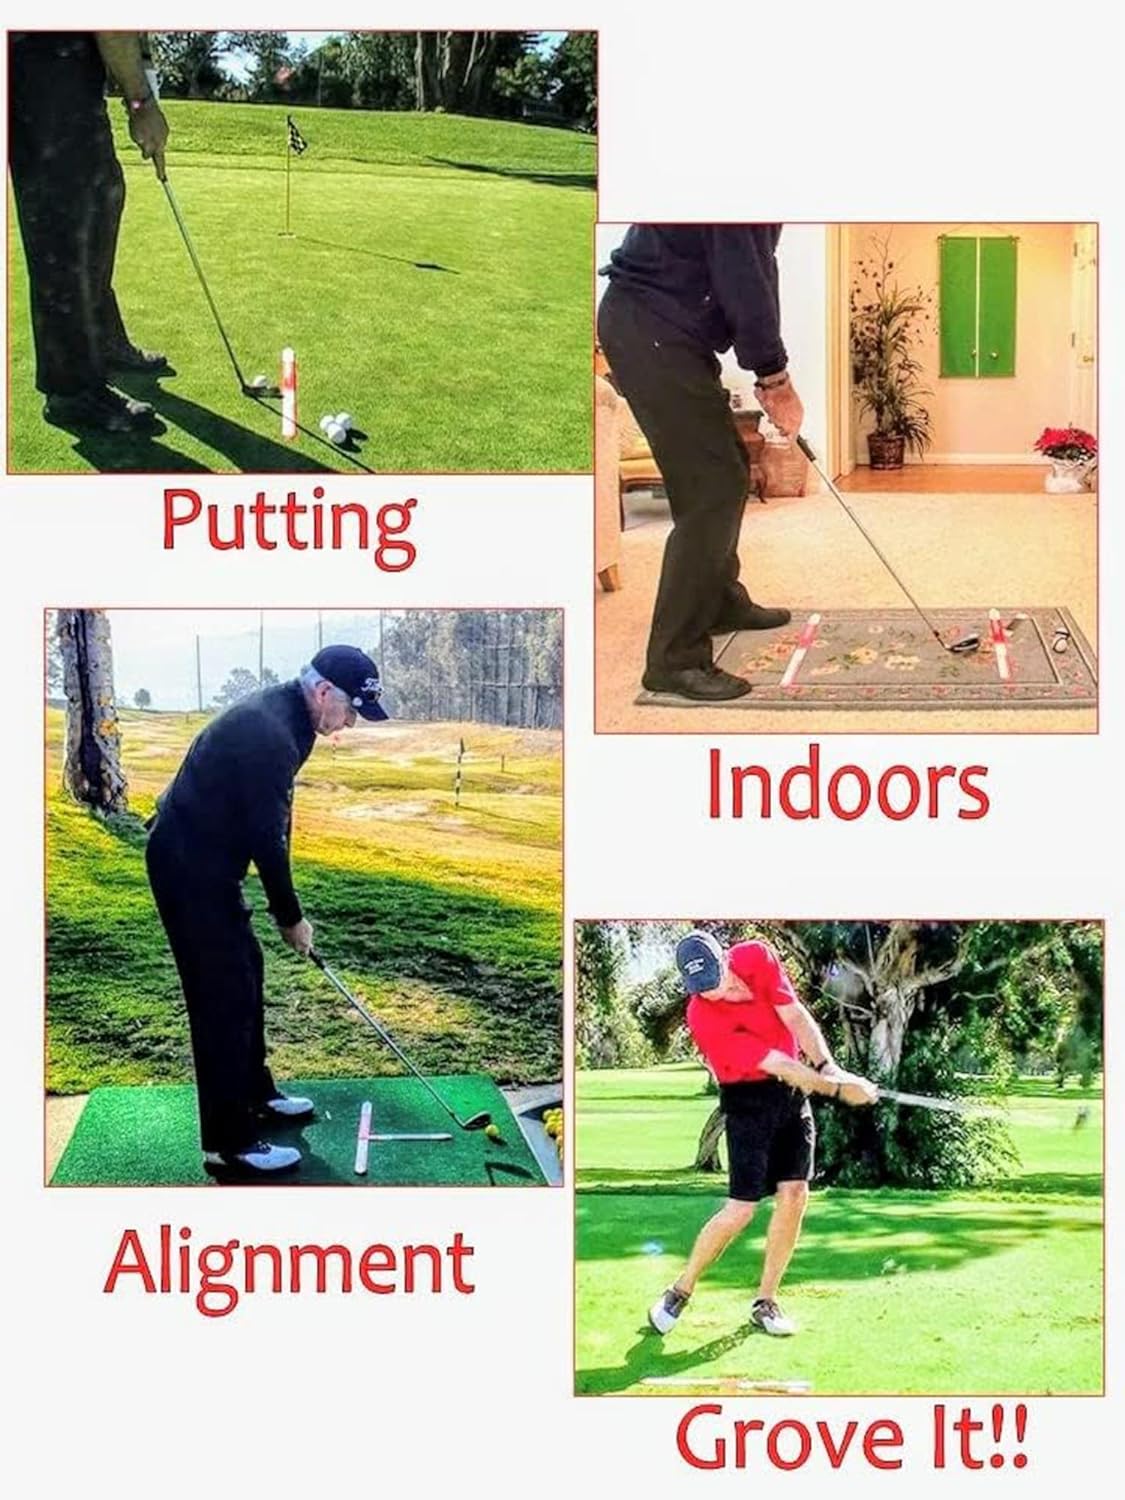 InsideMove Golf Training Aid - Swing Trainer and Putting Aid - Improves Swing Plane, Impact, and Alignment - Hit The Perfect Draw - Easy to Transport and Store in Golf Bag - Golf Stocking Stuffers